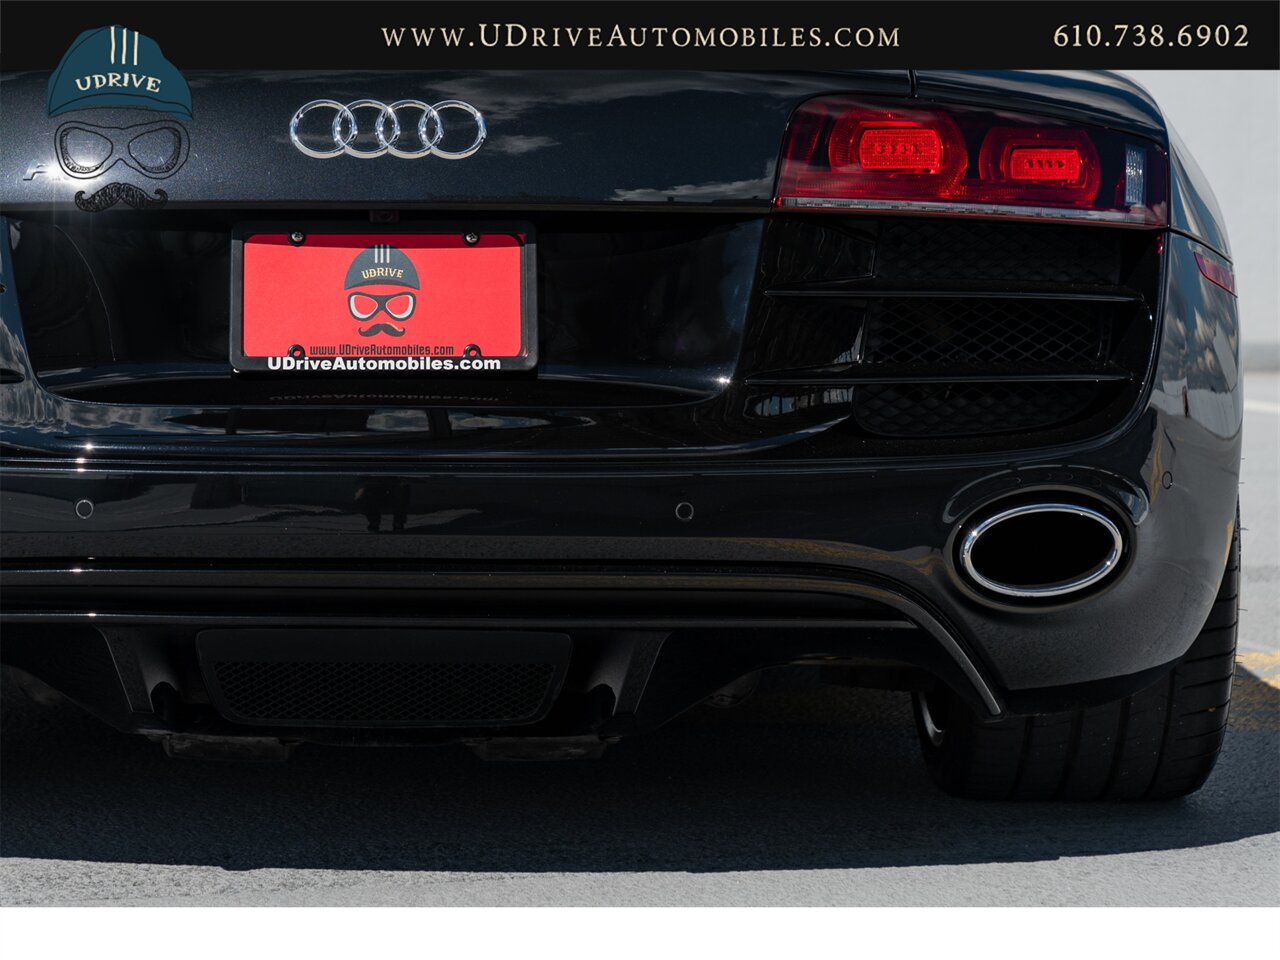 2011 Audi R8 5.2 Quattro  V10 6 Speed Manual - Photo 20 - West Chester, PA 19382